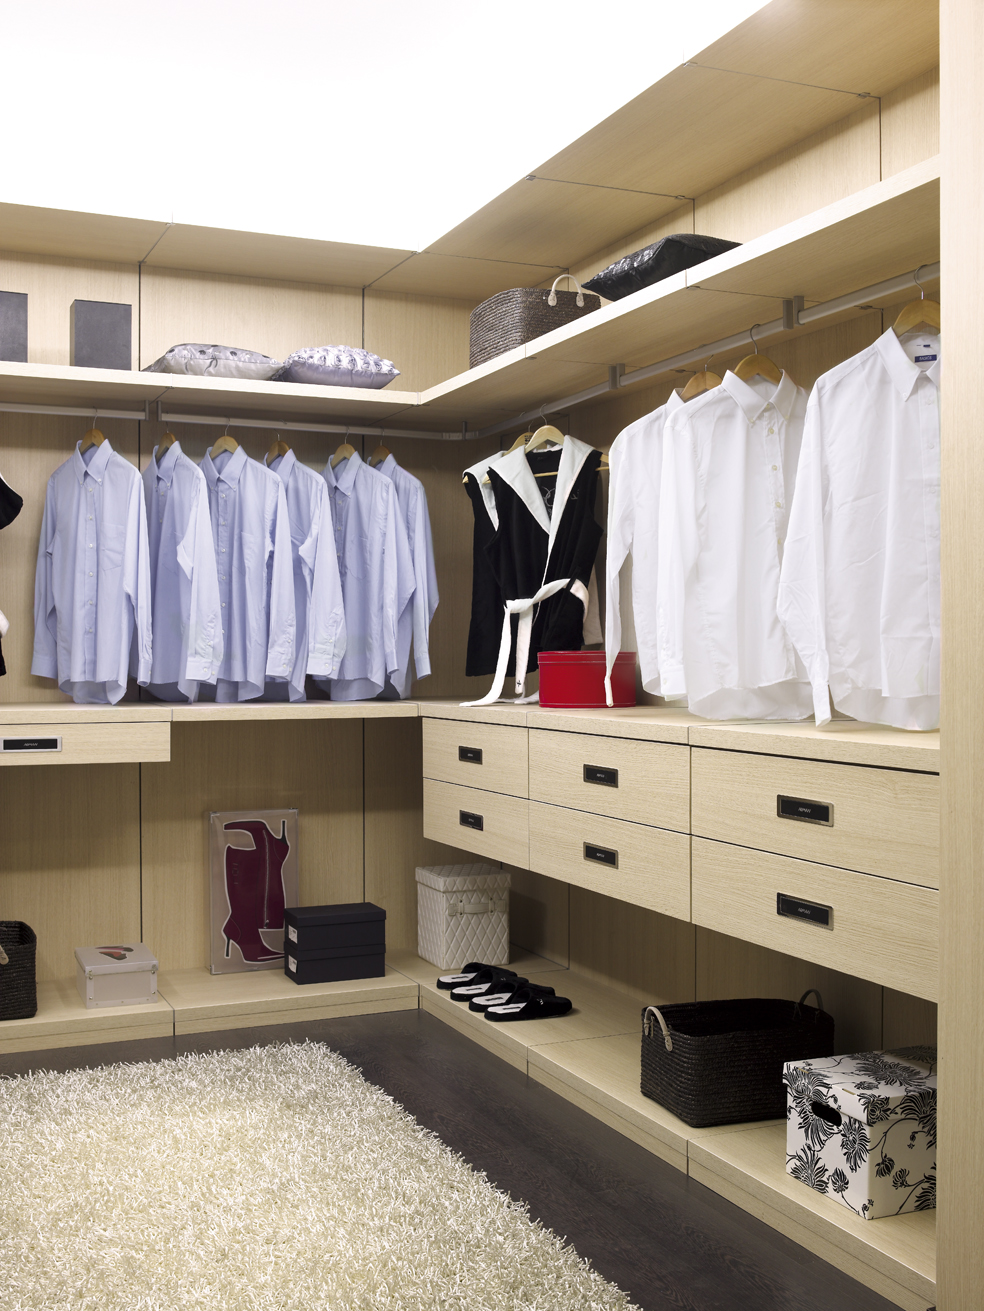 European Style Closets - Featured Image